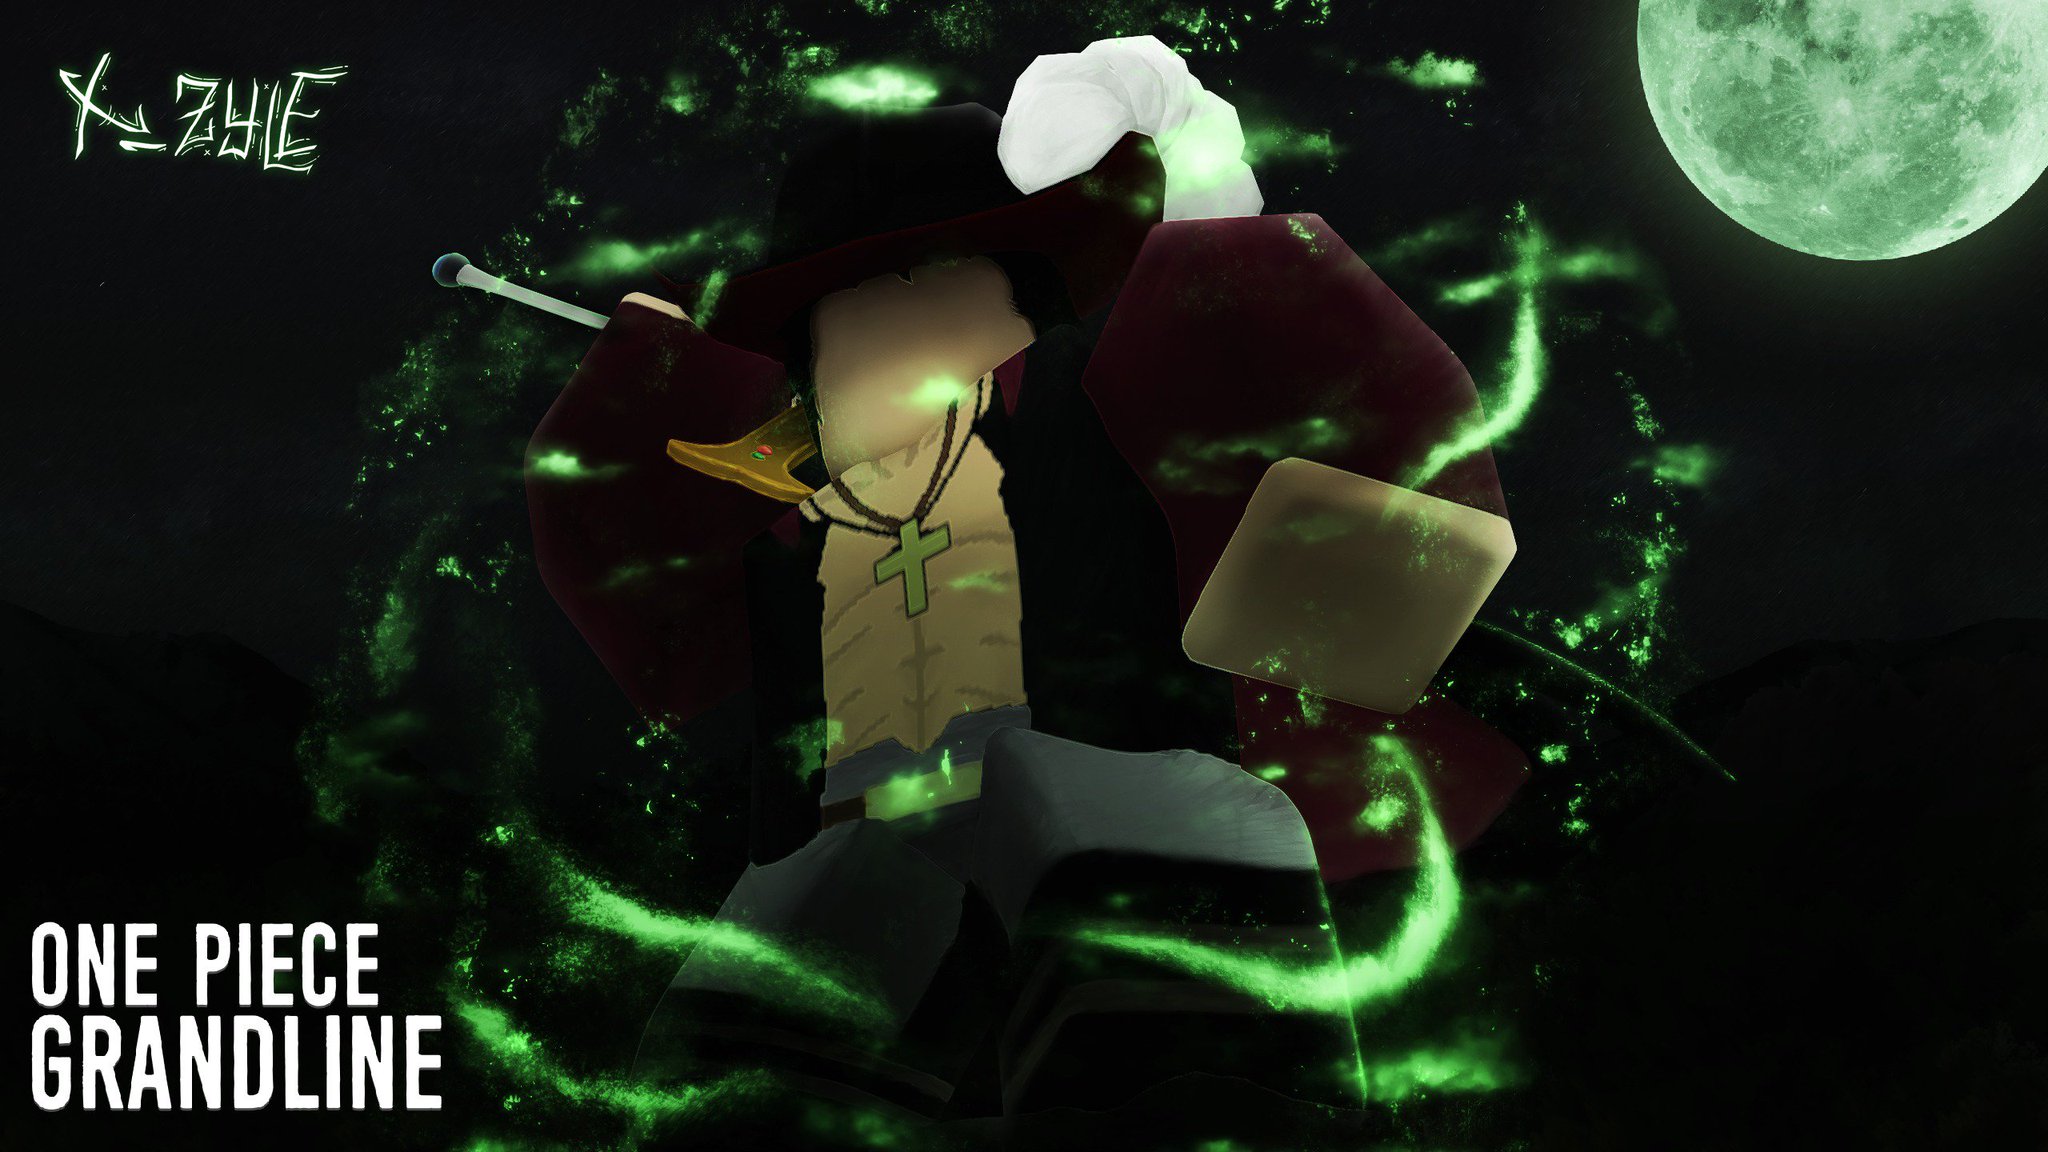 Xzyle On Twitter New Mihawk Gfx For One Piece Grandline Check Deviantart For High Res Version Feel Free To Use My Render But Pls Do Tag Me If You Do I D Like - 2048x1152 roblox gfx